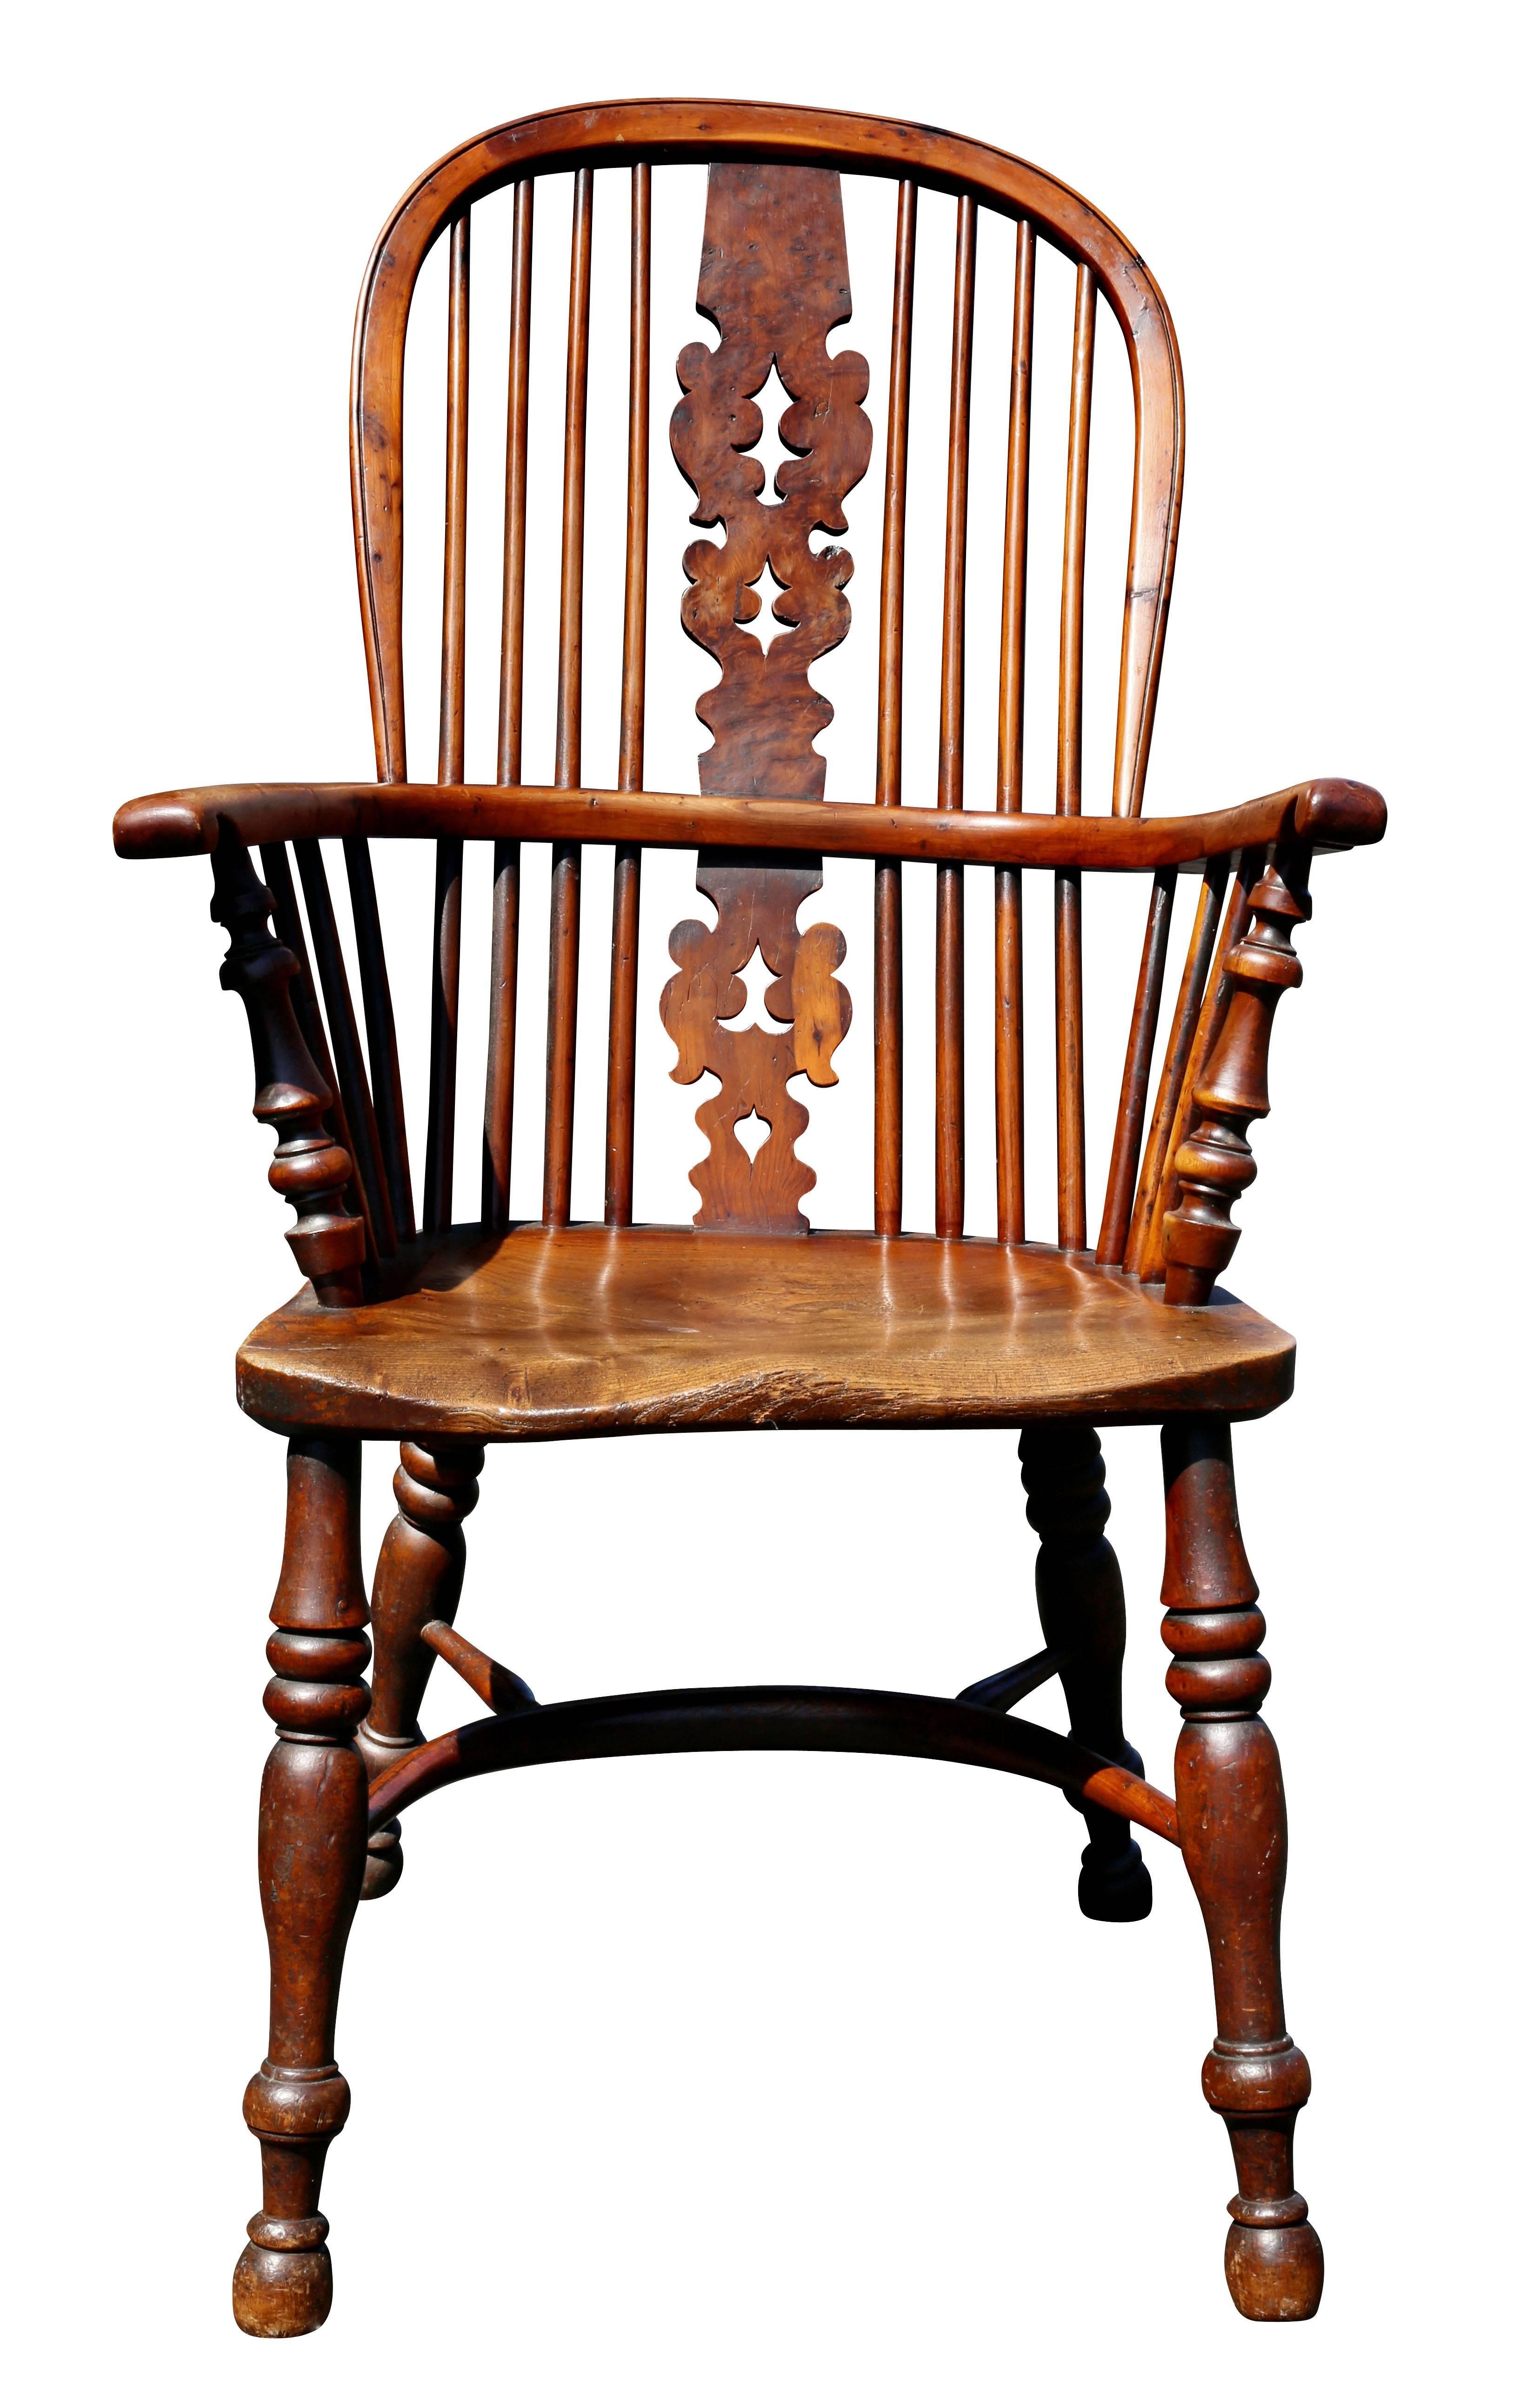 With arched back with central pierced splat flanked by spindles, shaped seat raised on turned legs with crinoline stretcher.